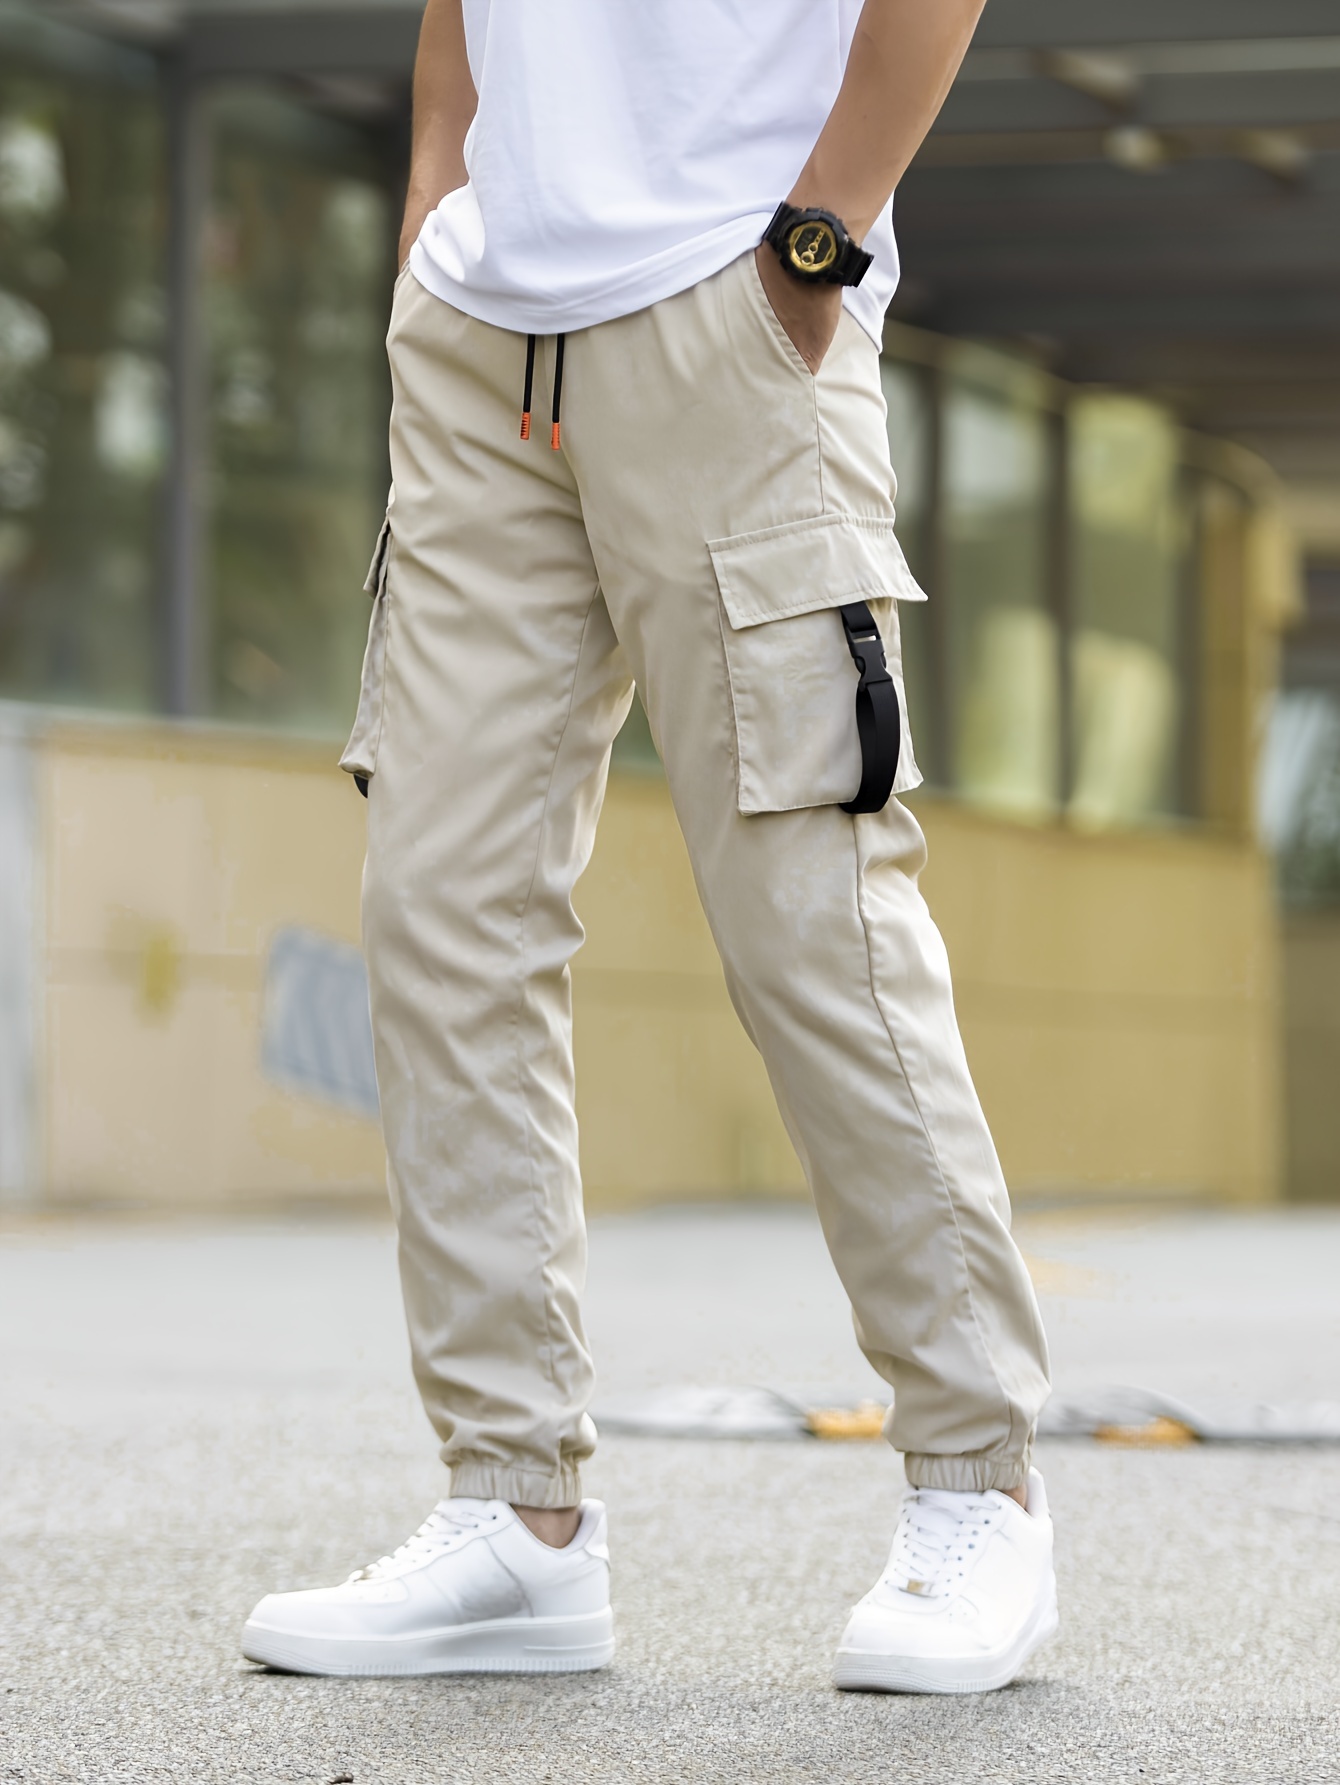 Classic Design Multi Flap Pockets Cargo Pants,Men's Loose Fit Drawstring  Solid Cargo Pants，For Skateboarding,Street,Outdoor Camping